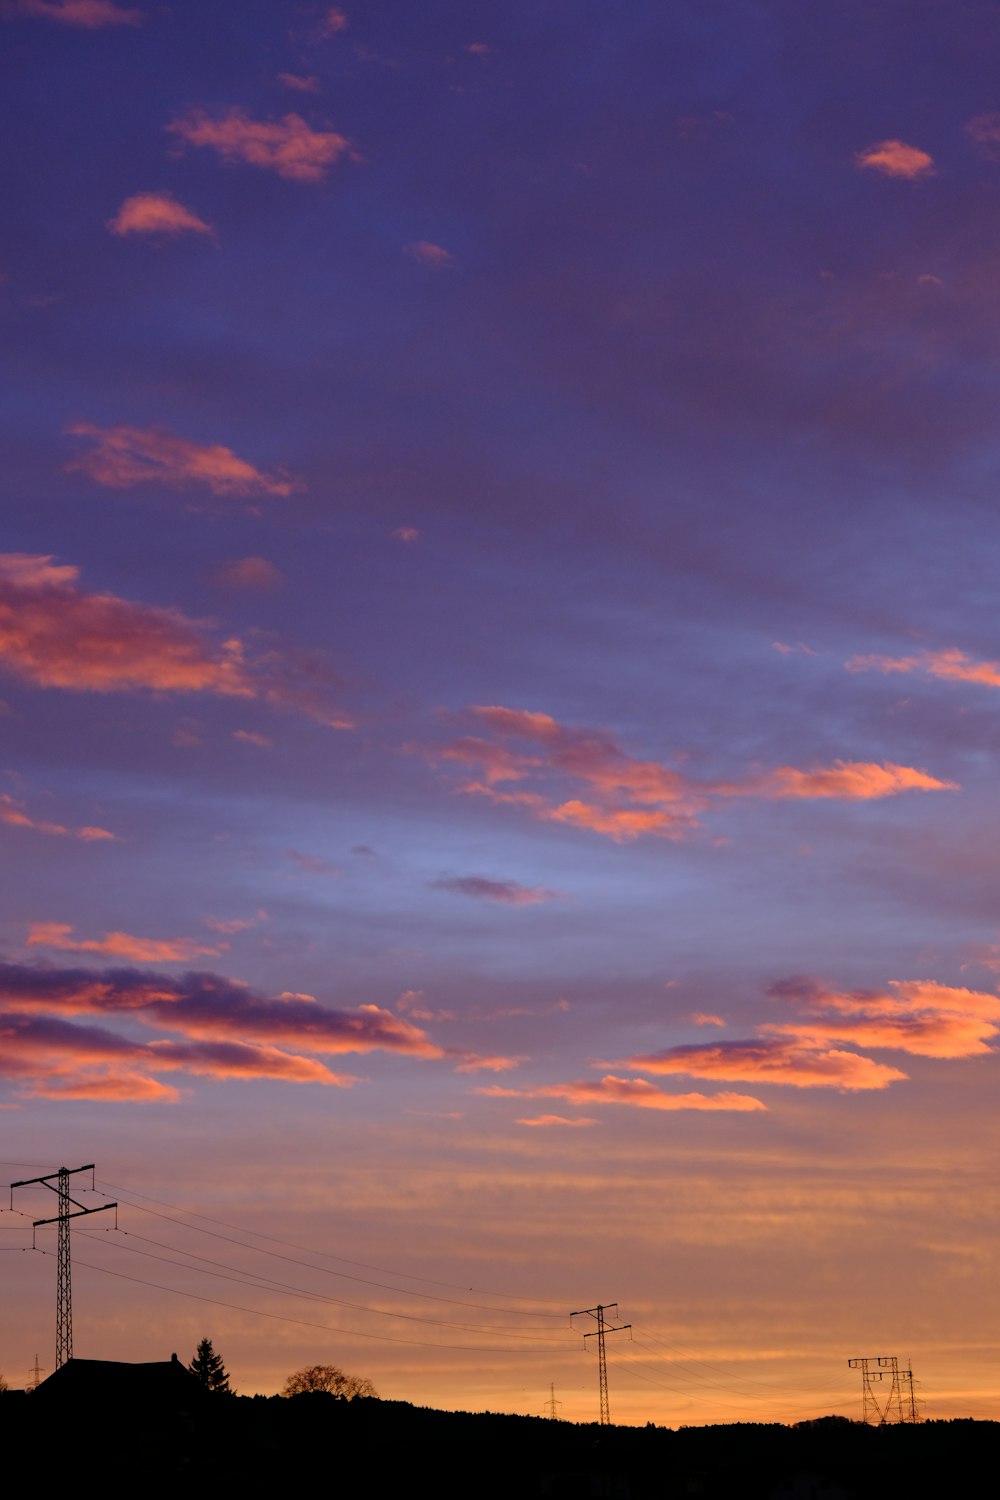 a view of a sunset with power lines in the foreground